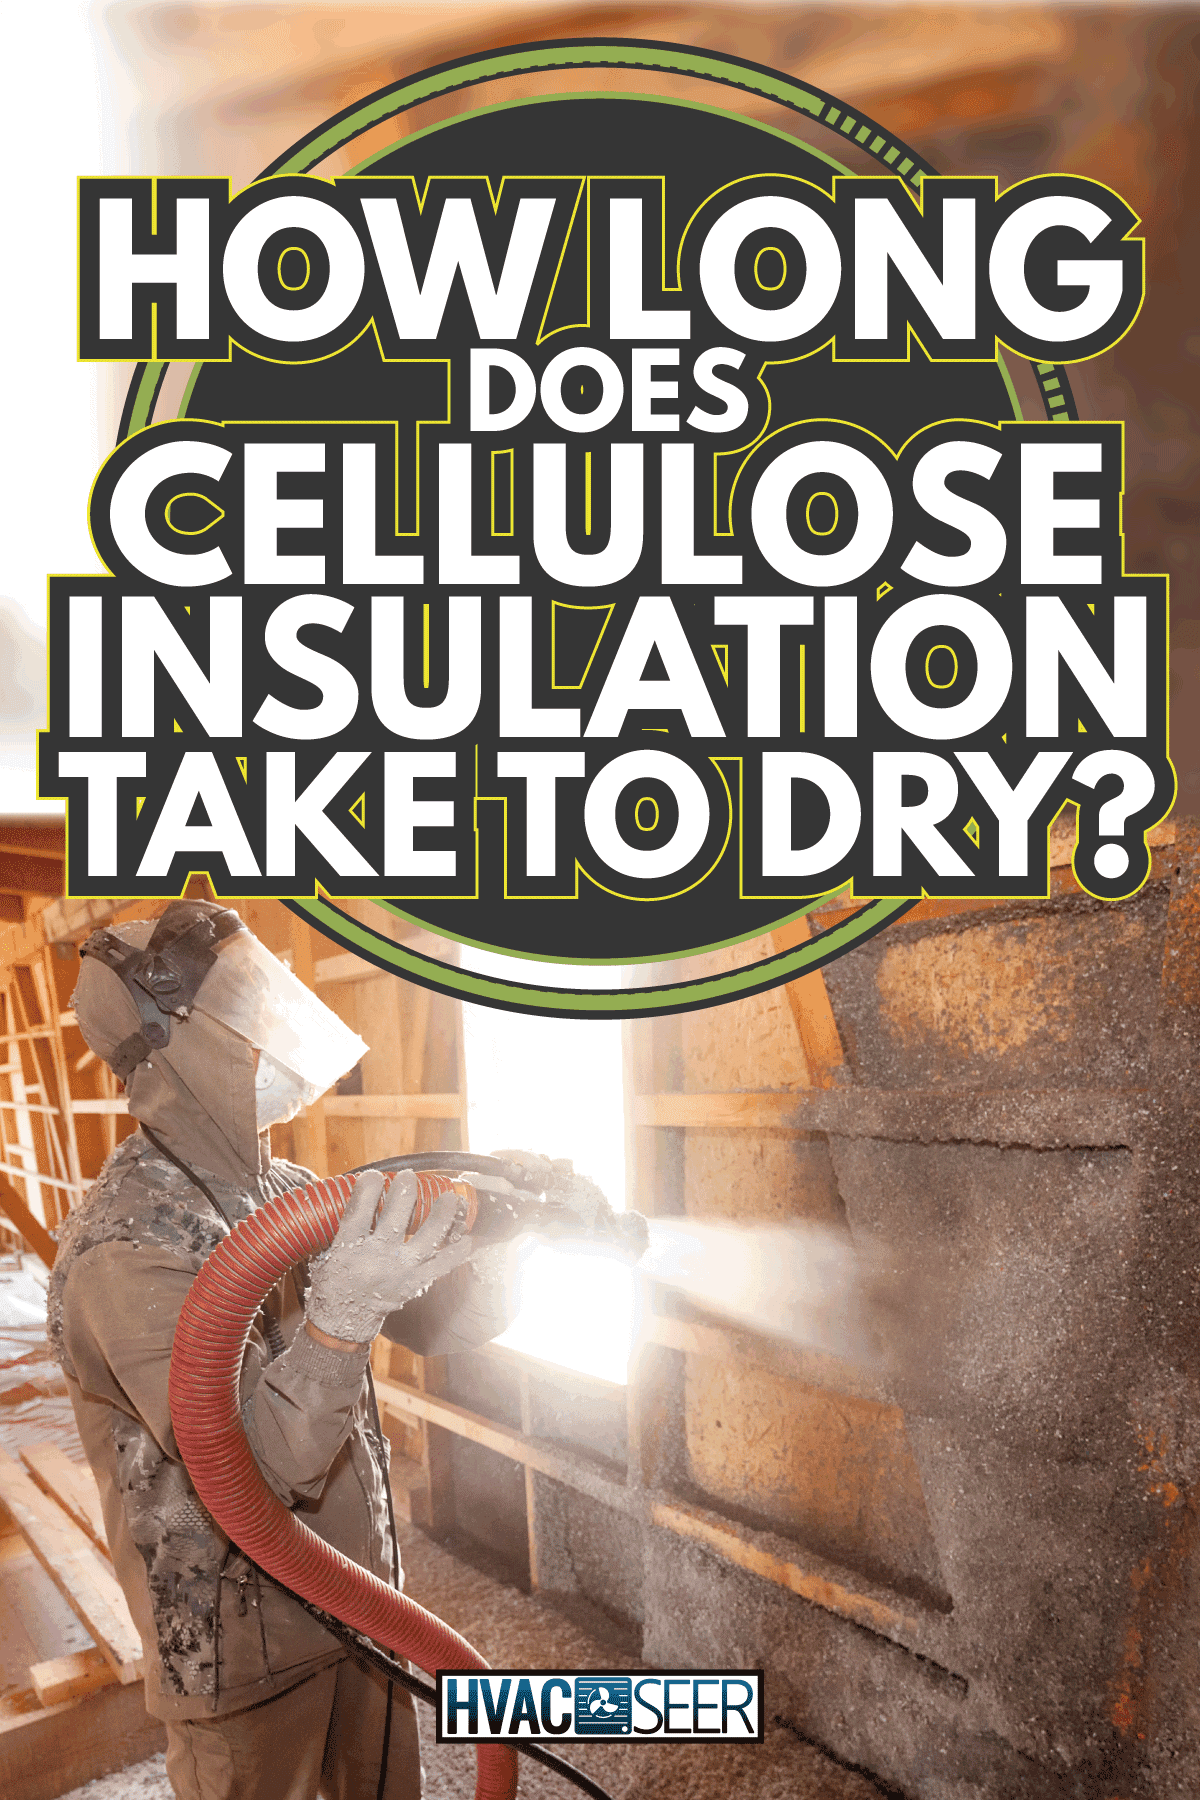 Spraying cellulose insulation on the wall. How Long Does Cellulose Insulation Take To Dry